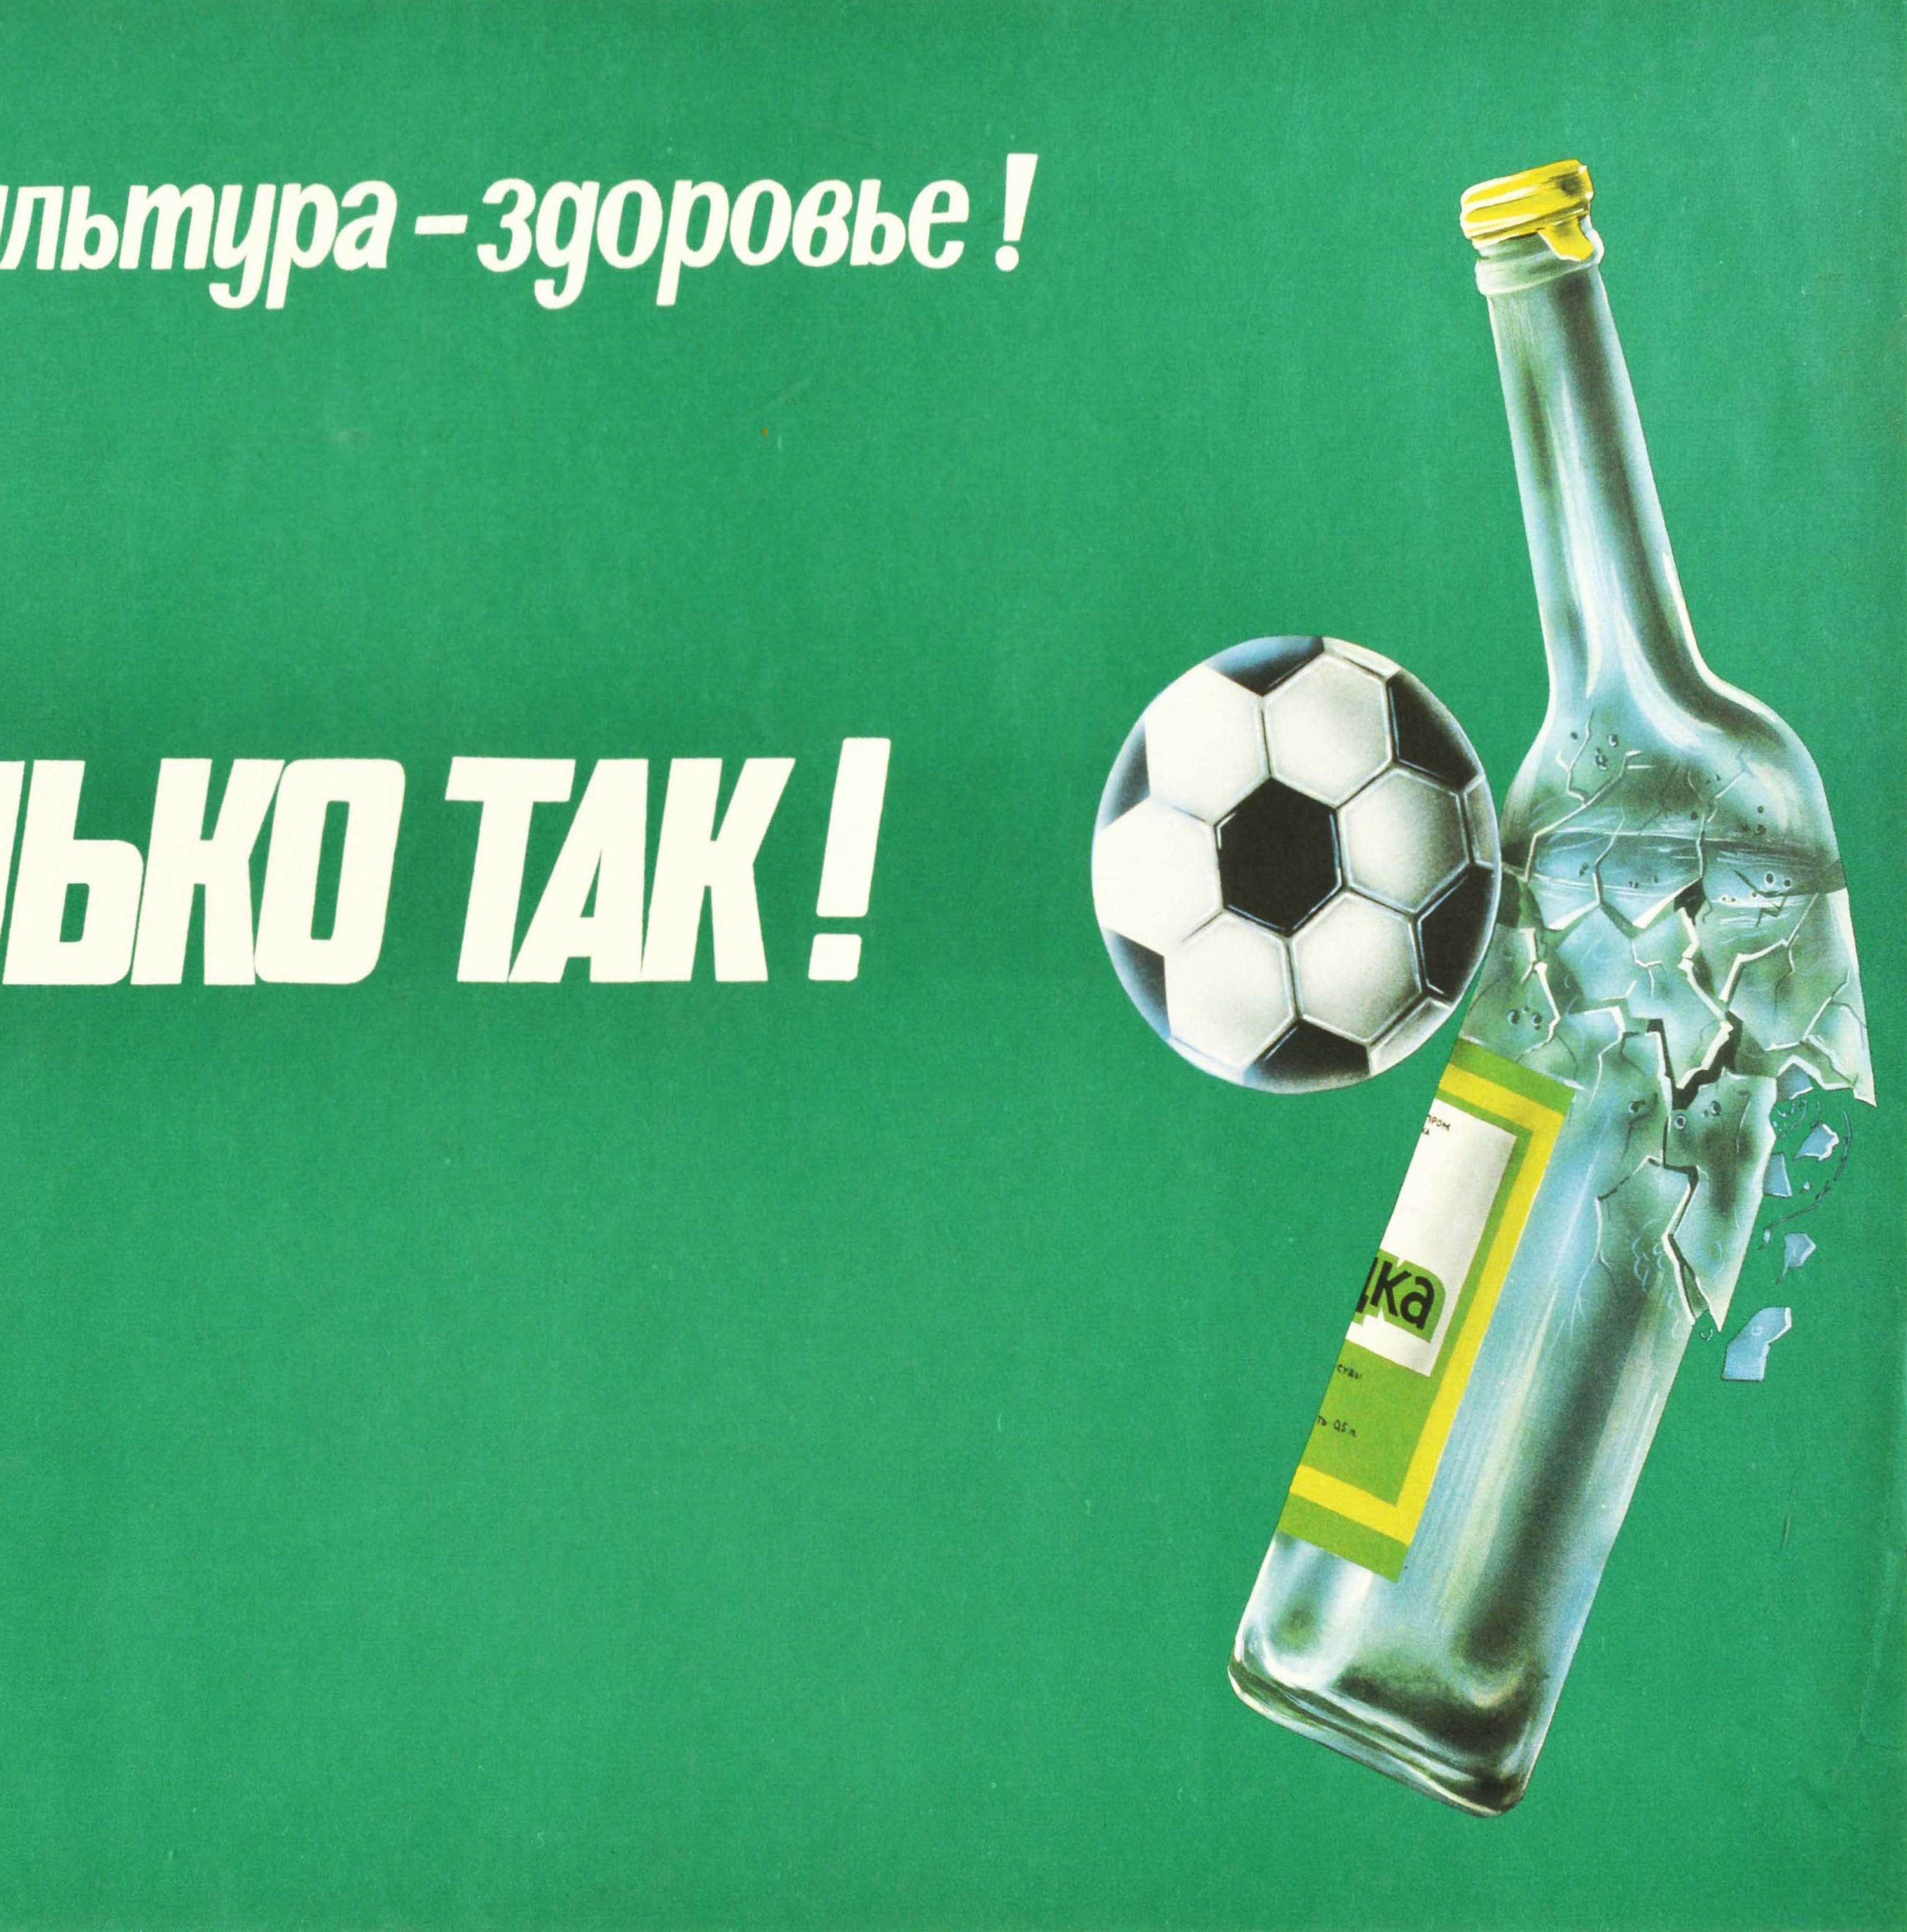 Original Vintage Propaganda Poster Physical Education Is Health Football Vodka In Good Condition For Sale In London, GB